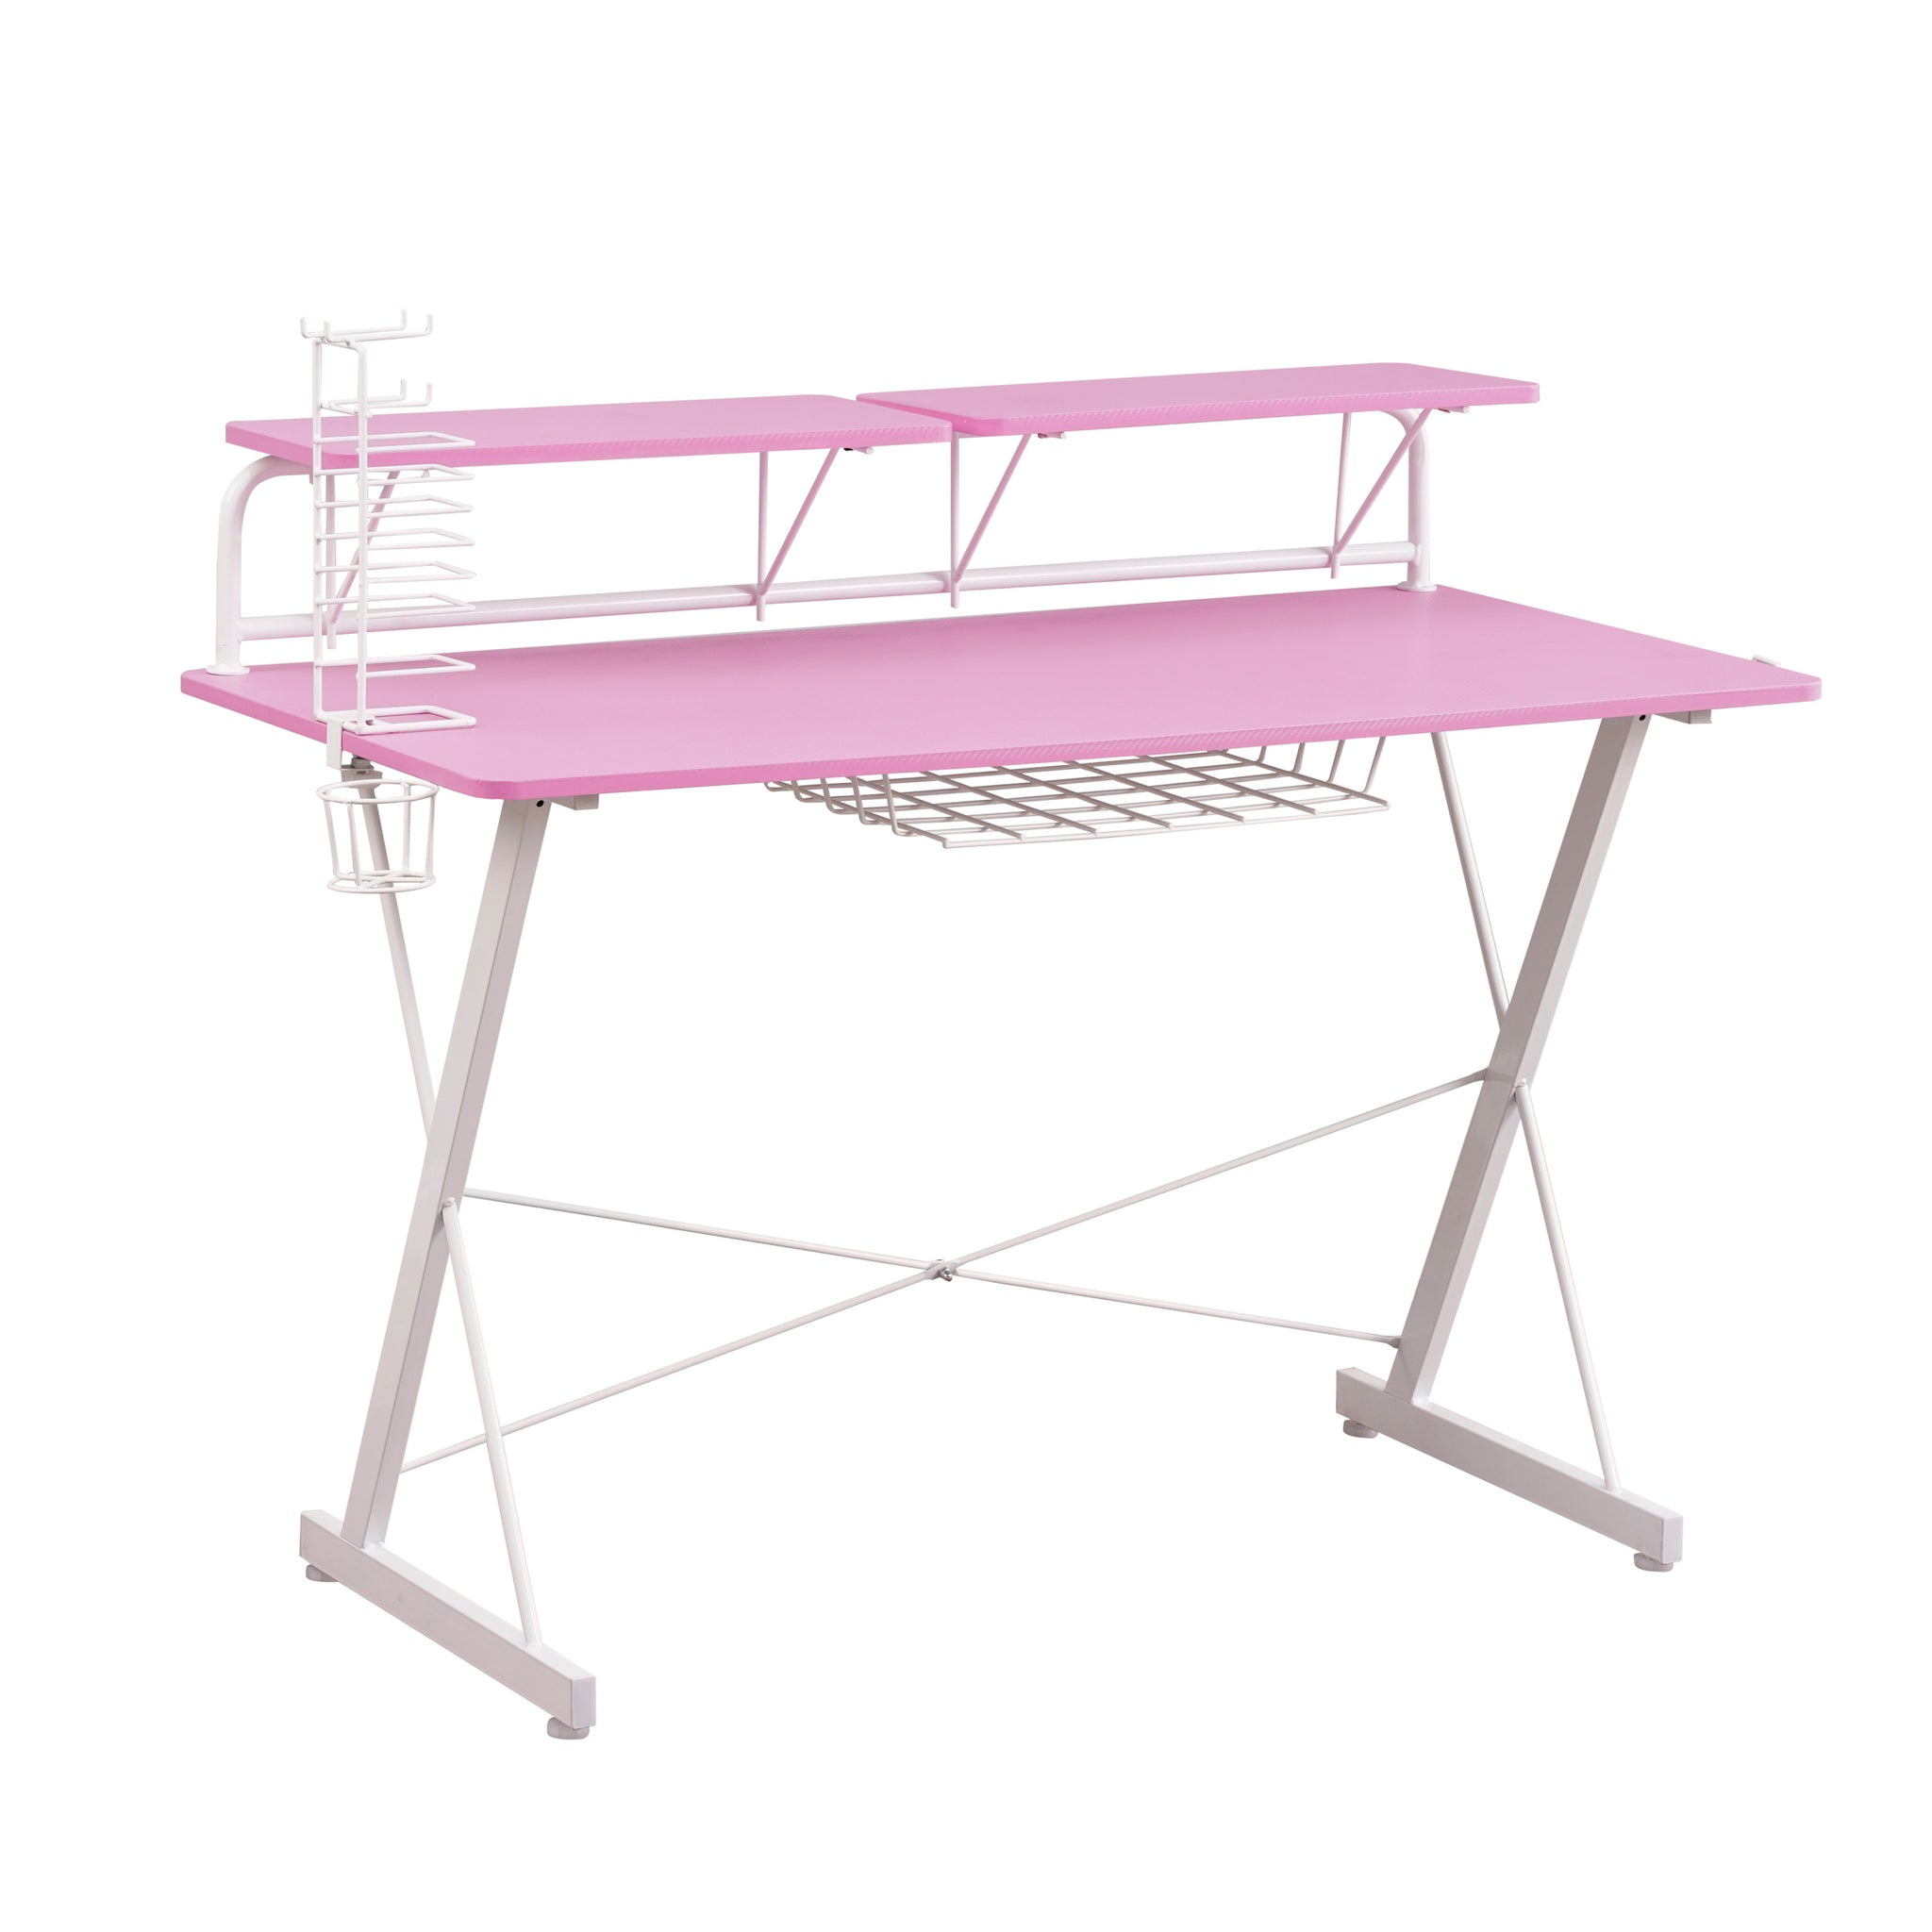 Techni Sport TS 200 Carbon Computer Gaming Desk with pink-cable management-gaming